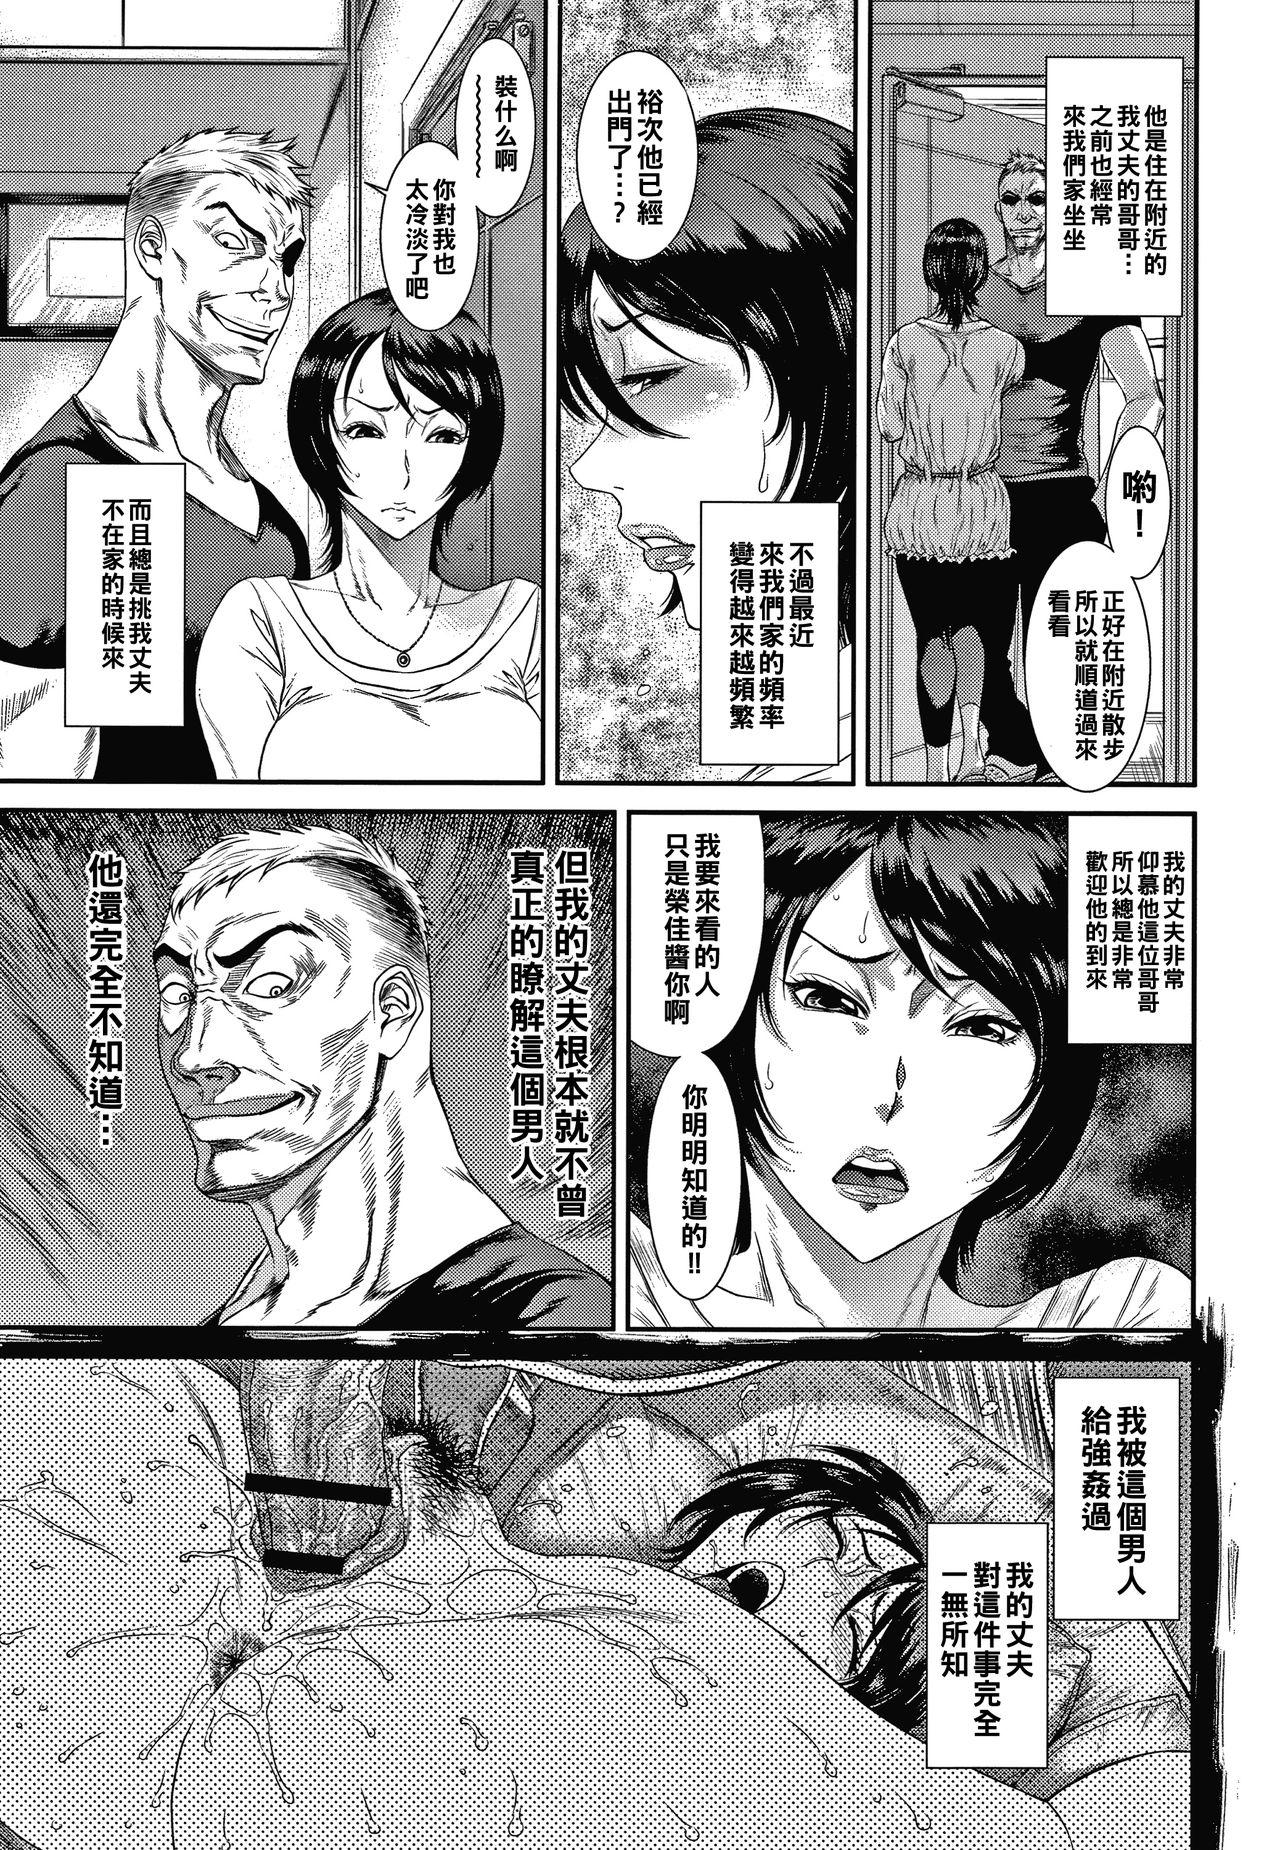 Longhair 罪悪感と快楽主義（Chinese） Deep Throat - Page 5